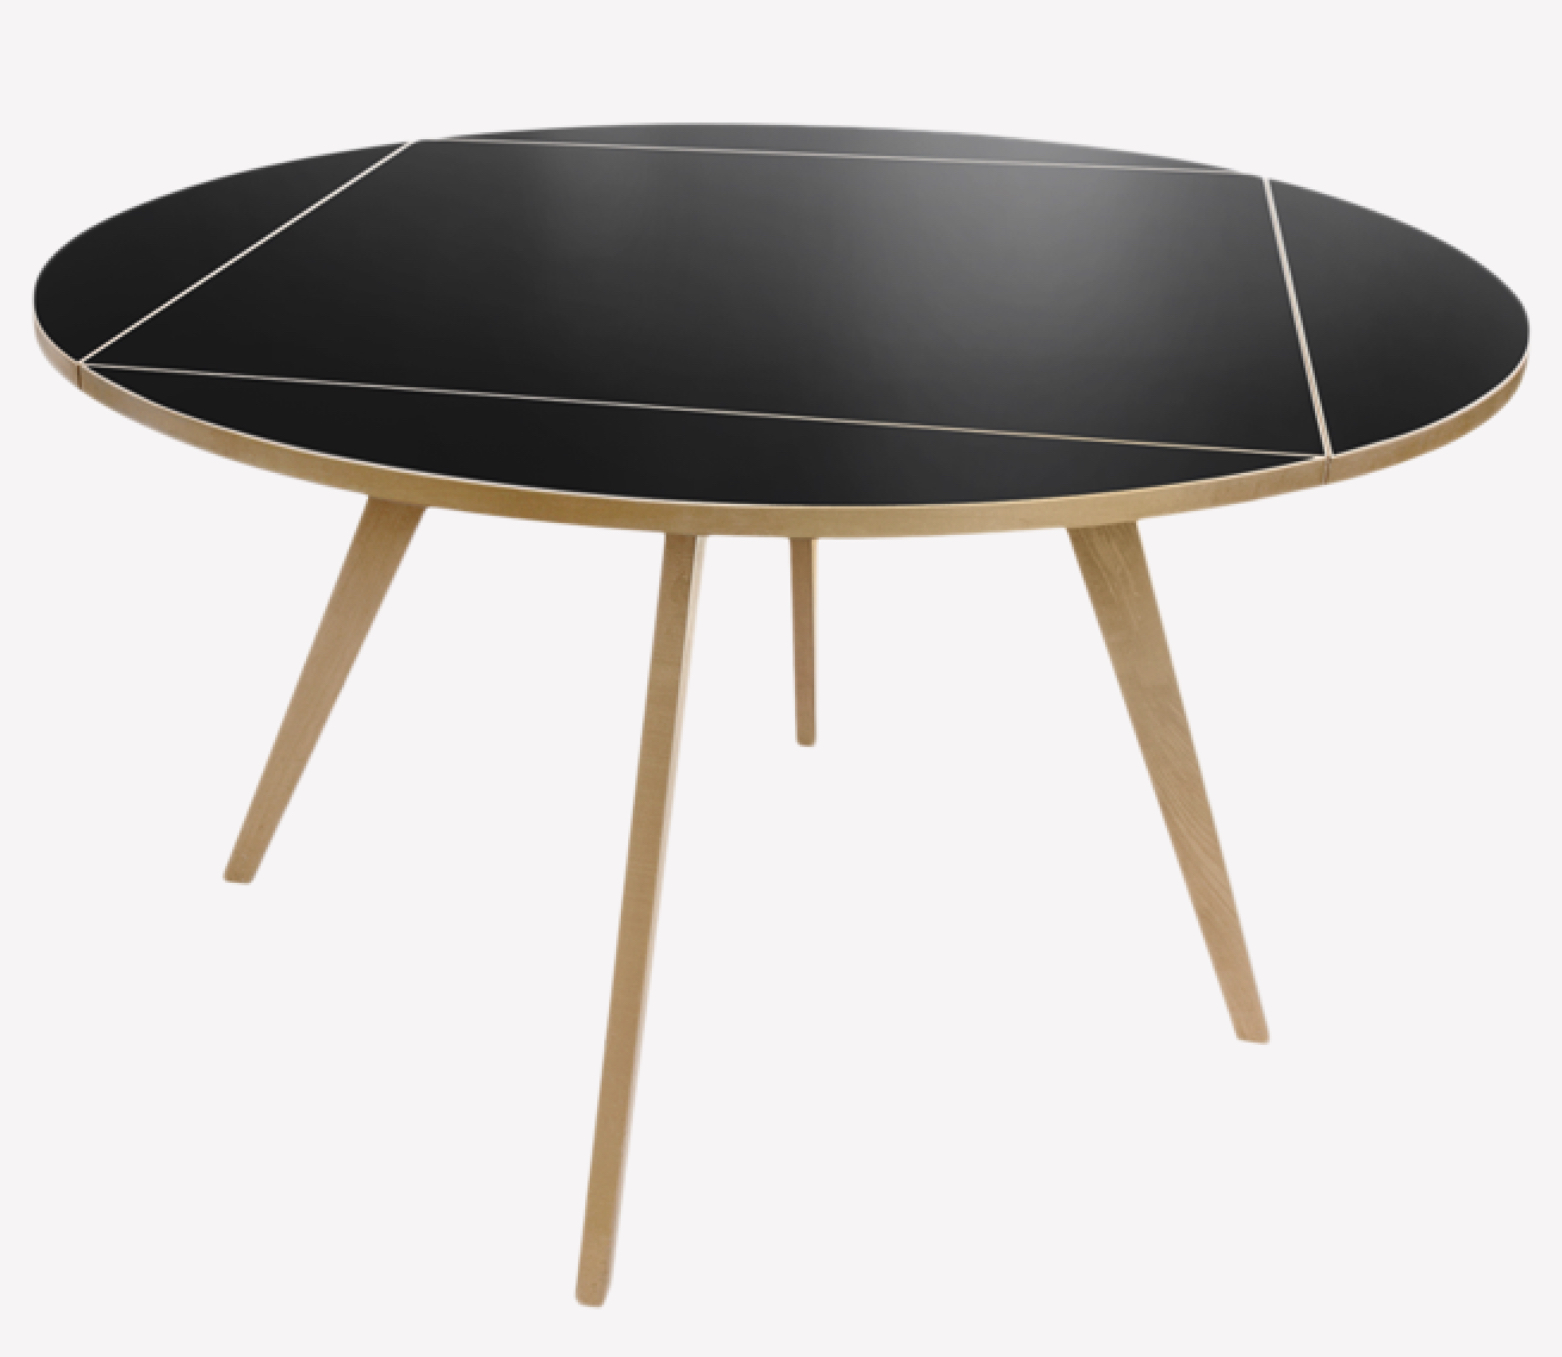 Max Bill square round table by wb form